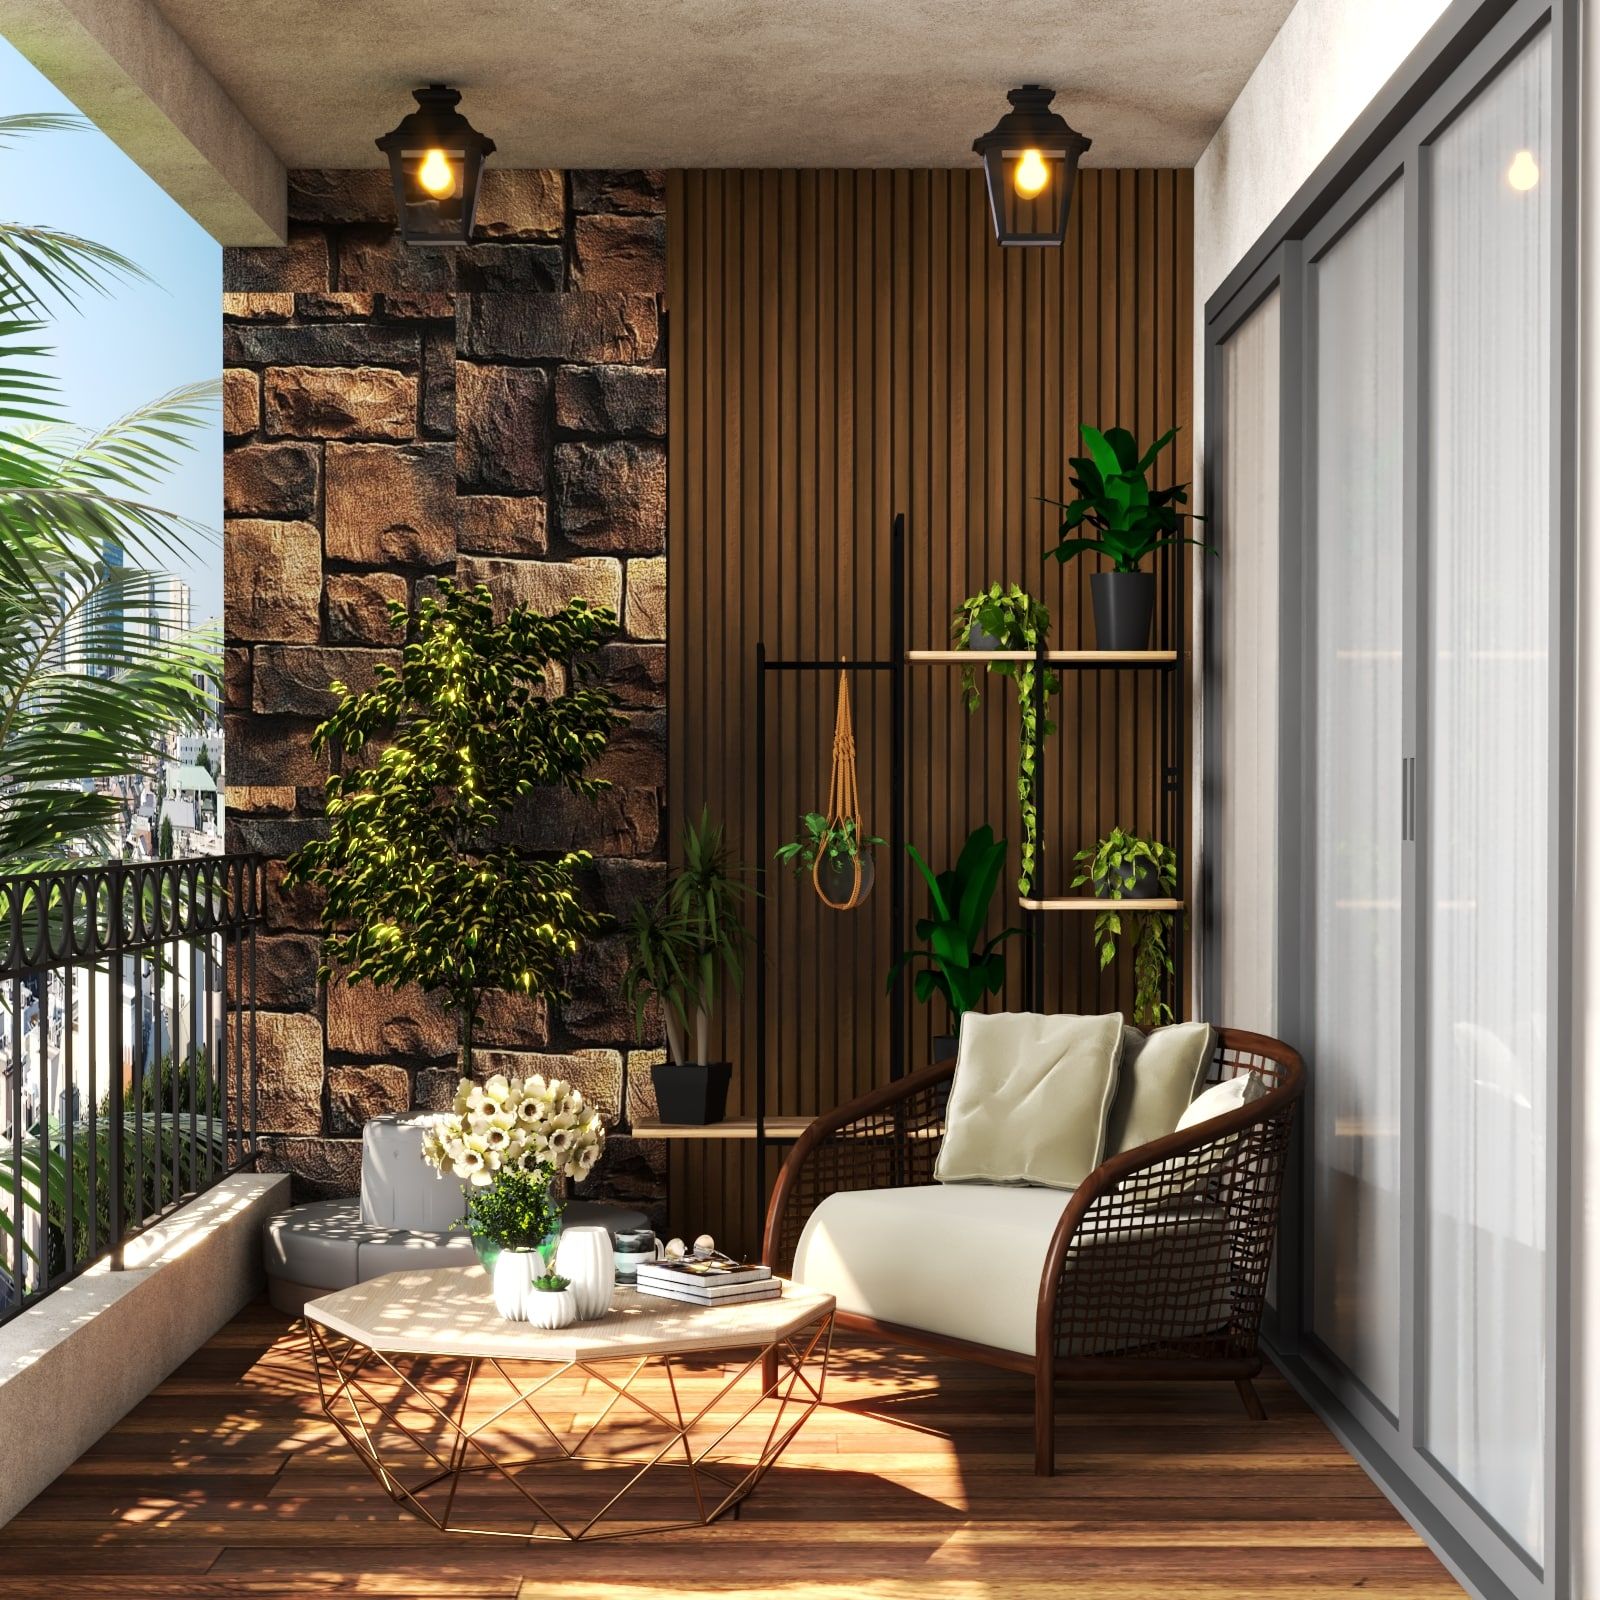 Tropical Balcony Design With Stone Cladding And Wooden Planks